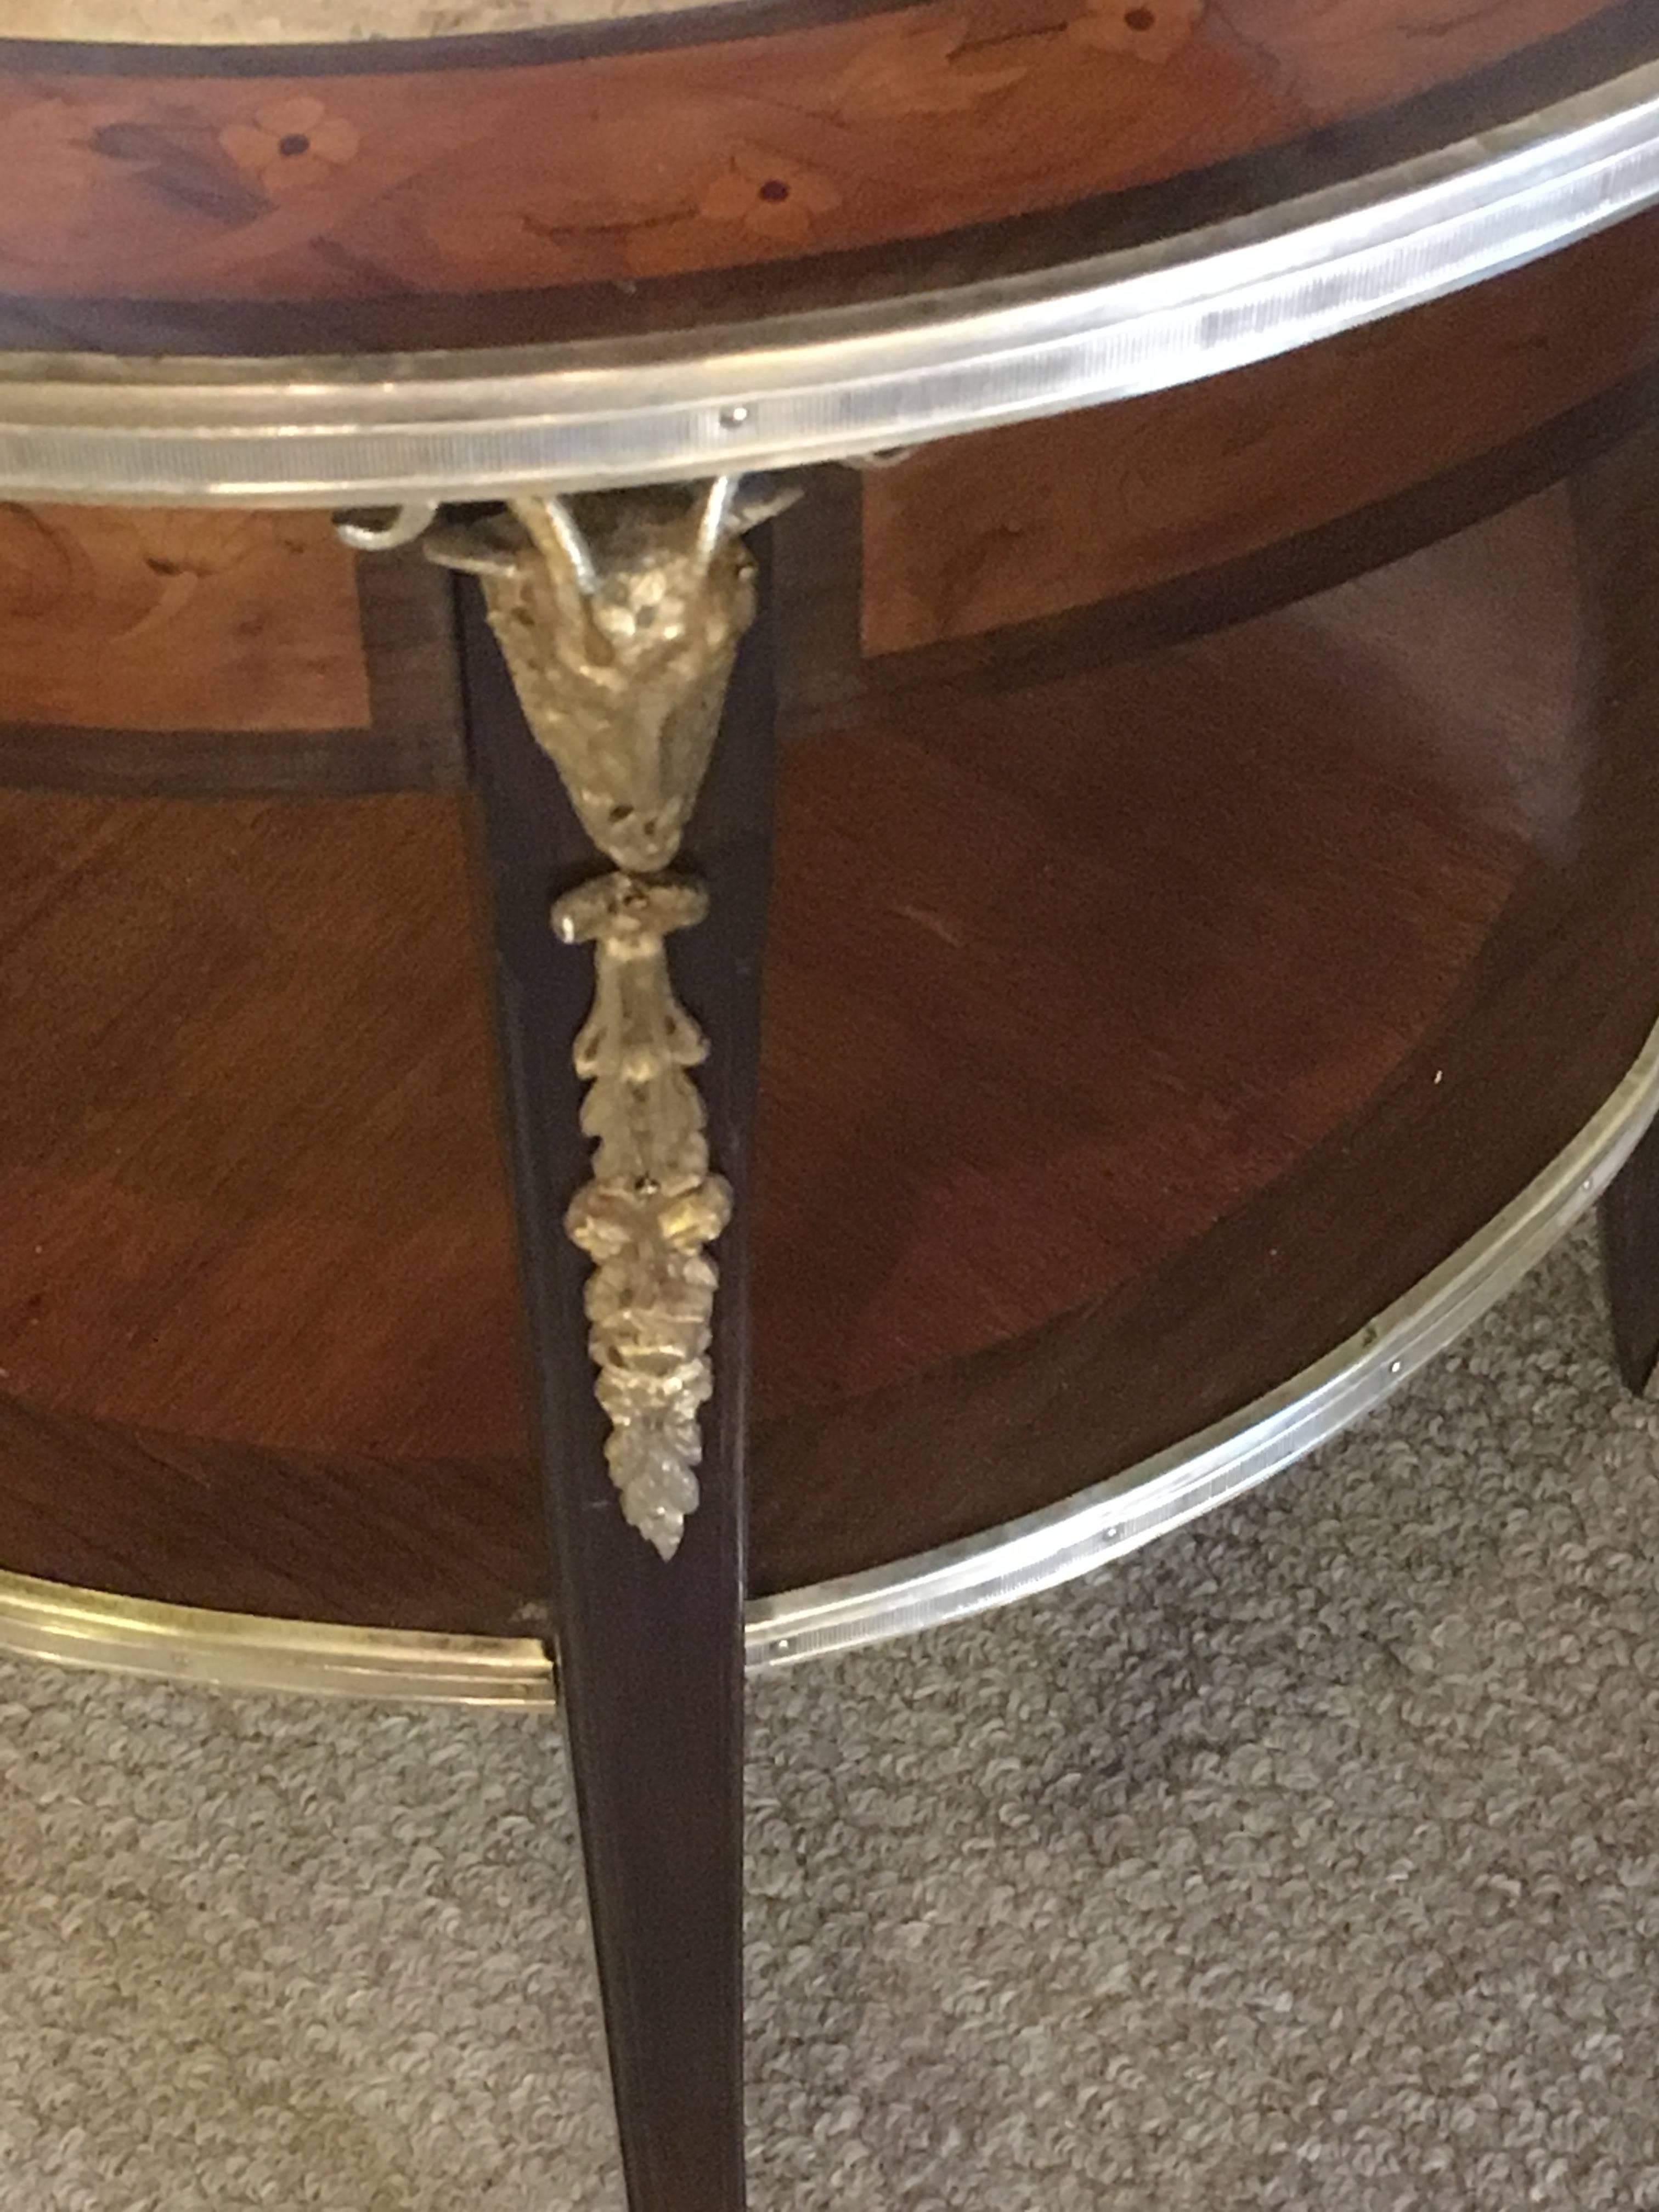 Pair of Large and Impressive Louis XV style marble-top tables or guerdons with rams heads. A spectacular pair of Louis XV style circular end tables. Each bronze claw foot leading to a curved group of legs supporting a bronze framed lower shelf and